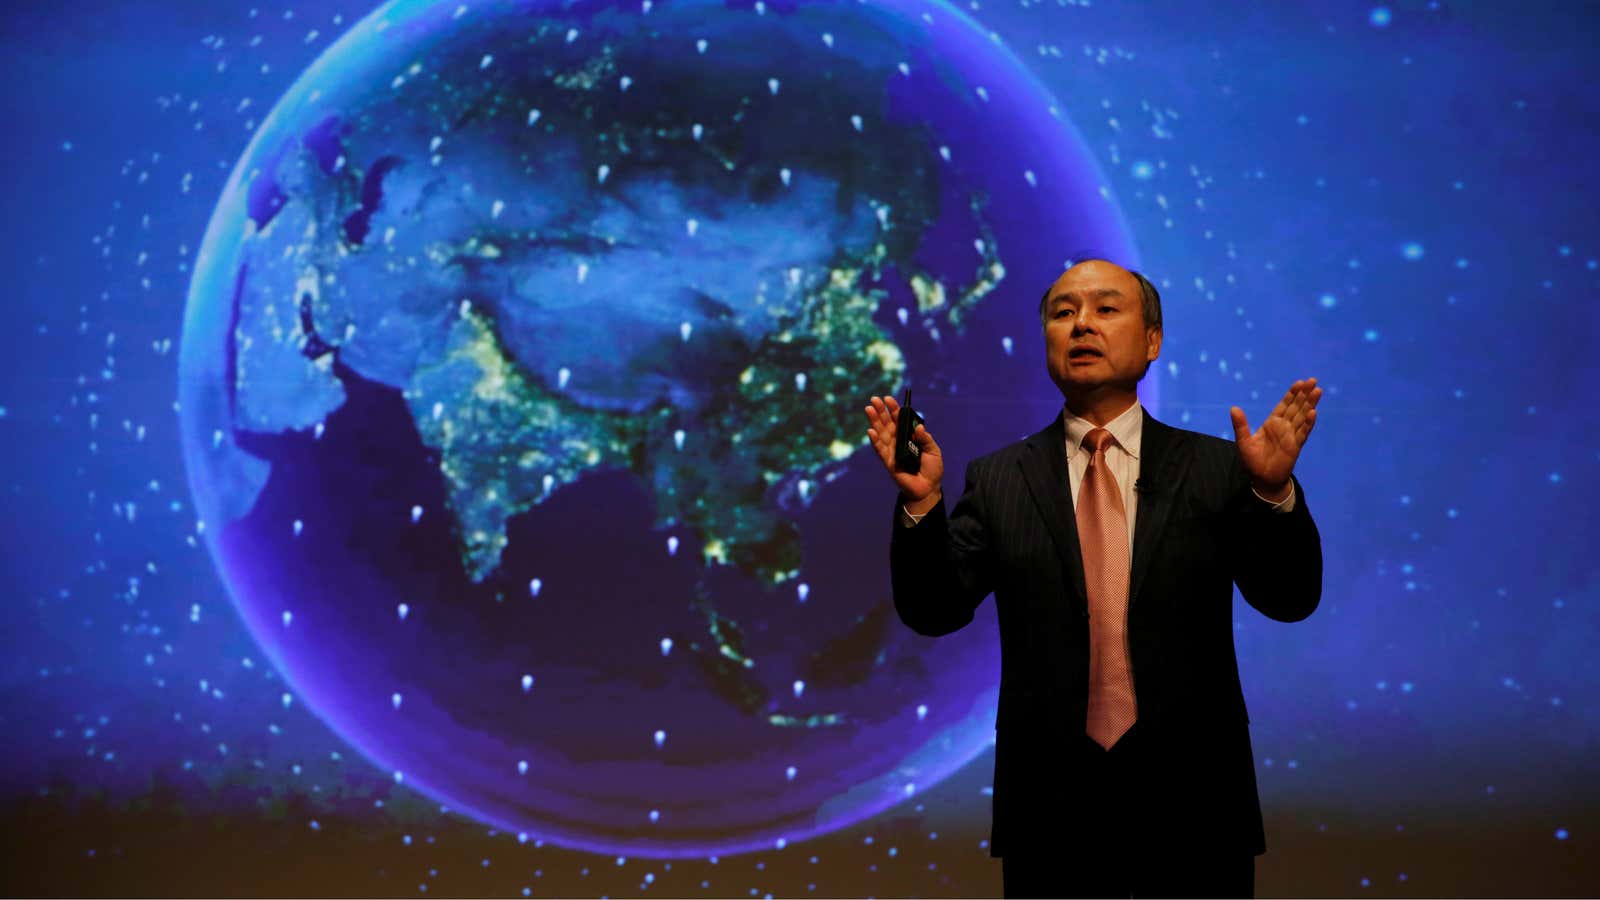 The world is yours, Masayoshi Son.